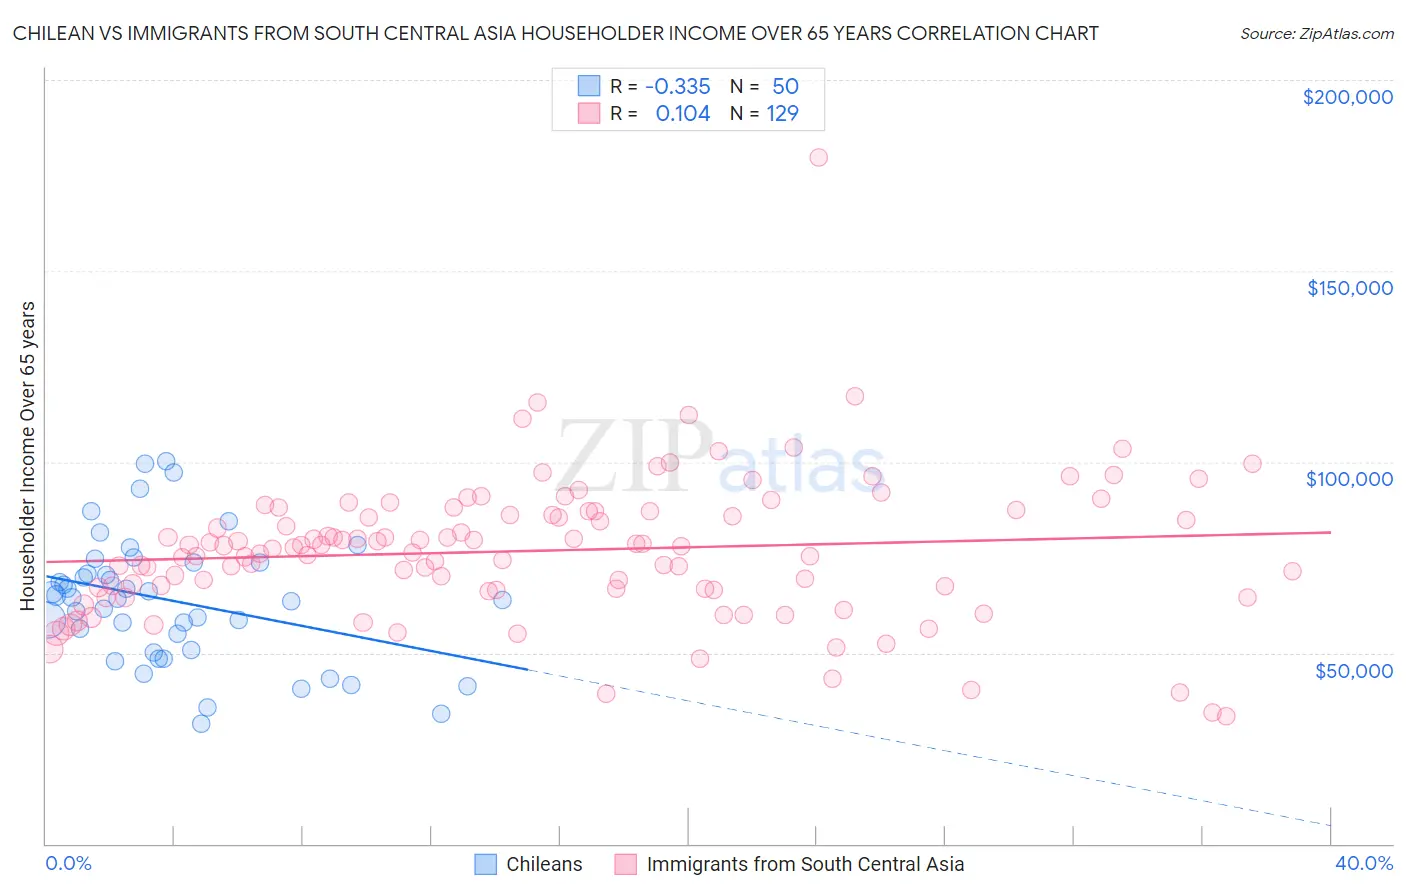 Chilean vs Immigrants from South Central Asia Householder Income Over 65 years